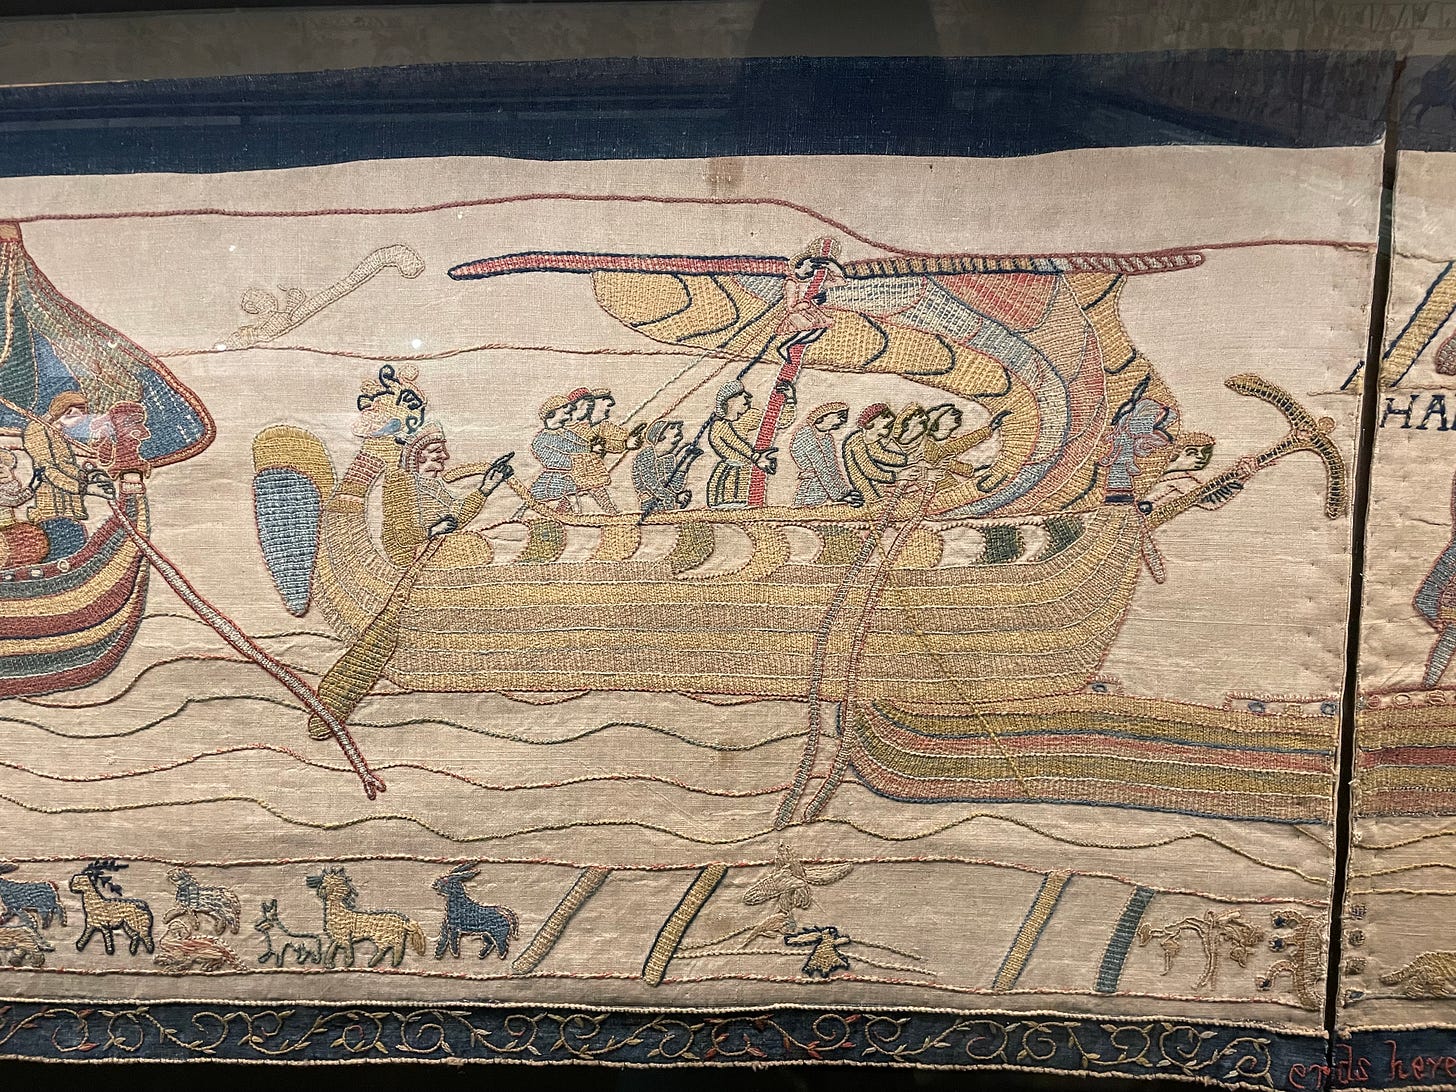 Embroidery on linen showing a boatload of Norman soldiers